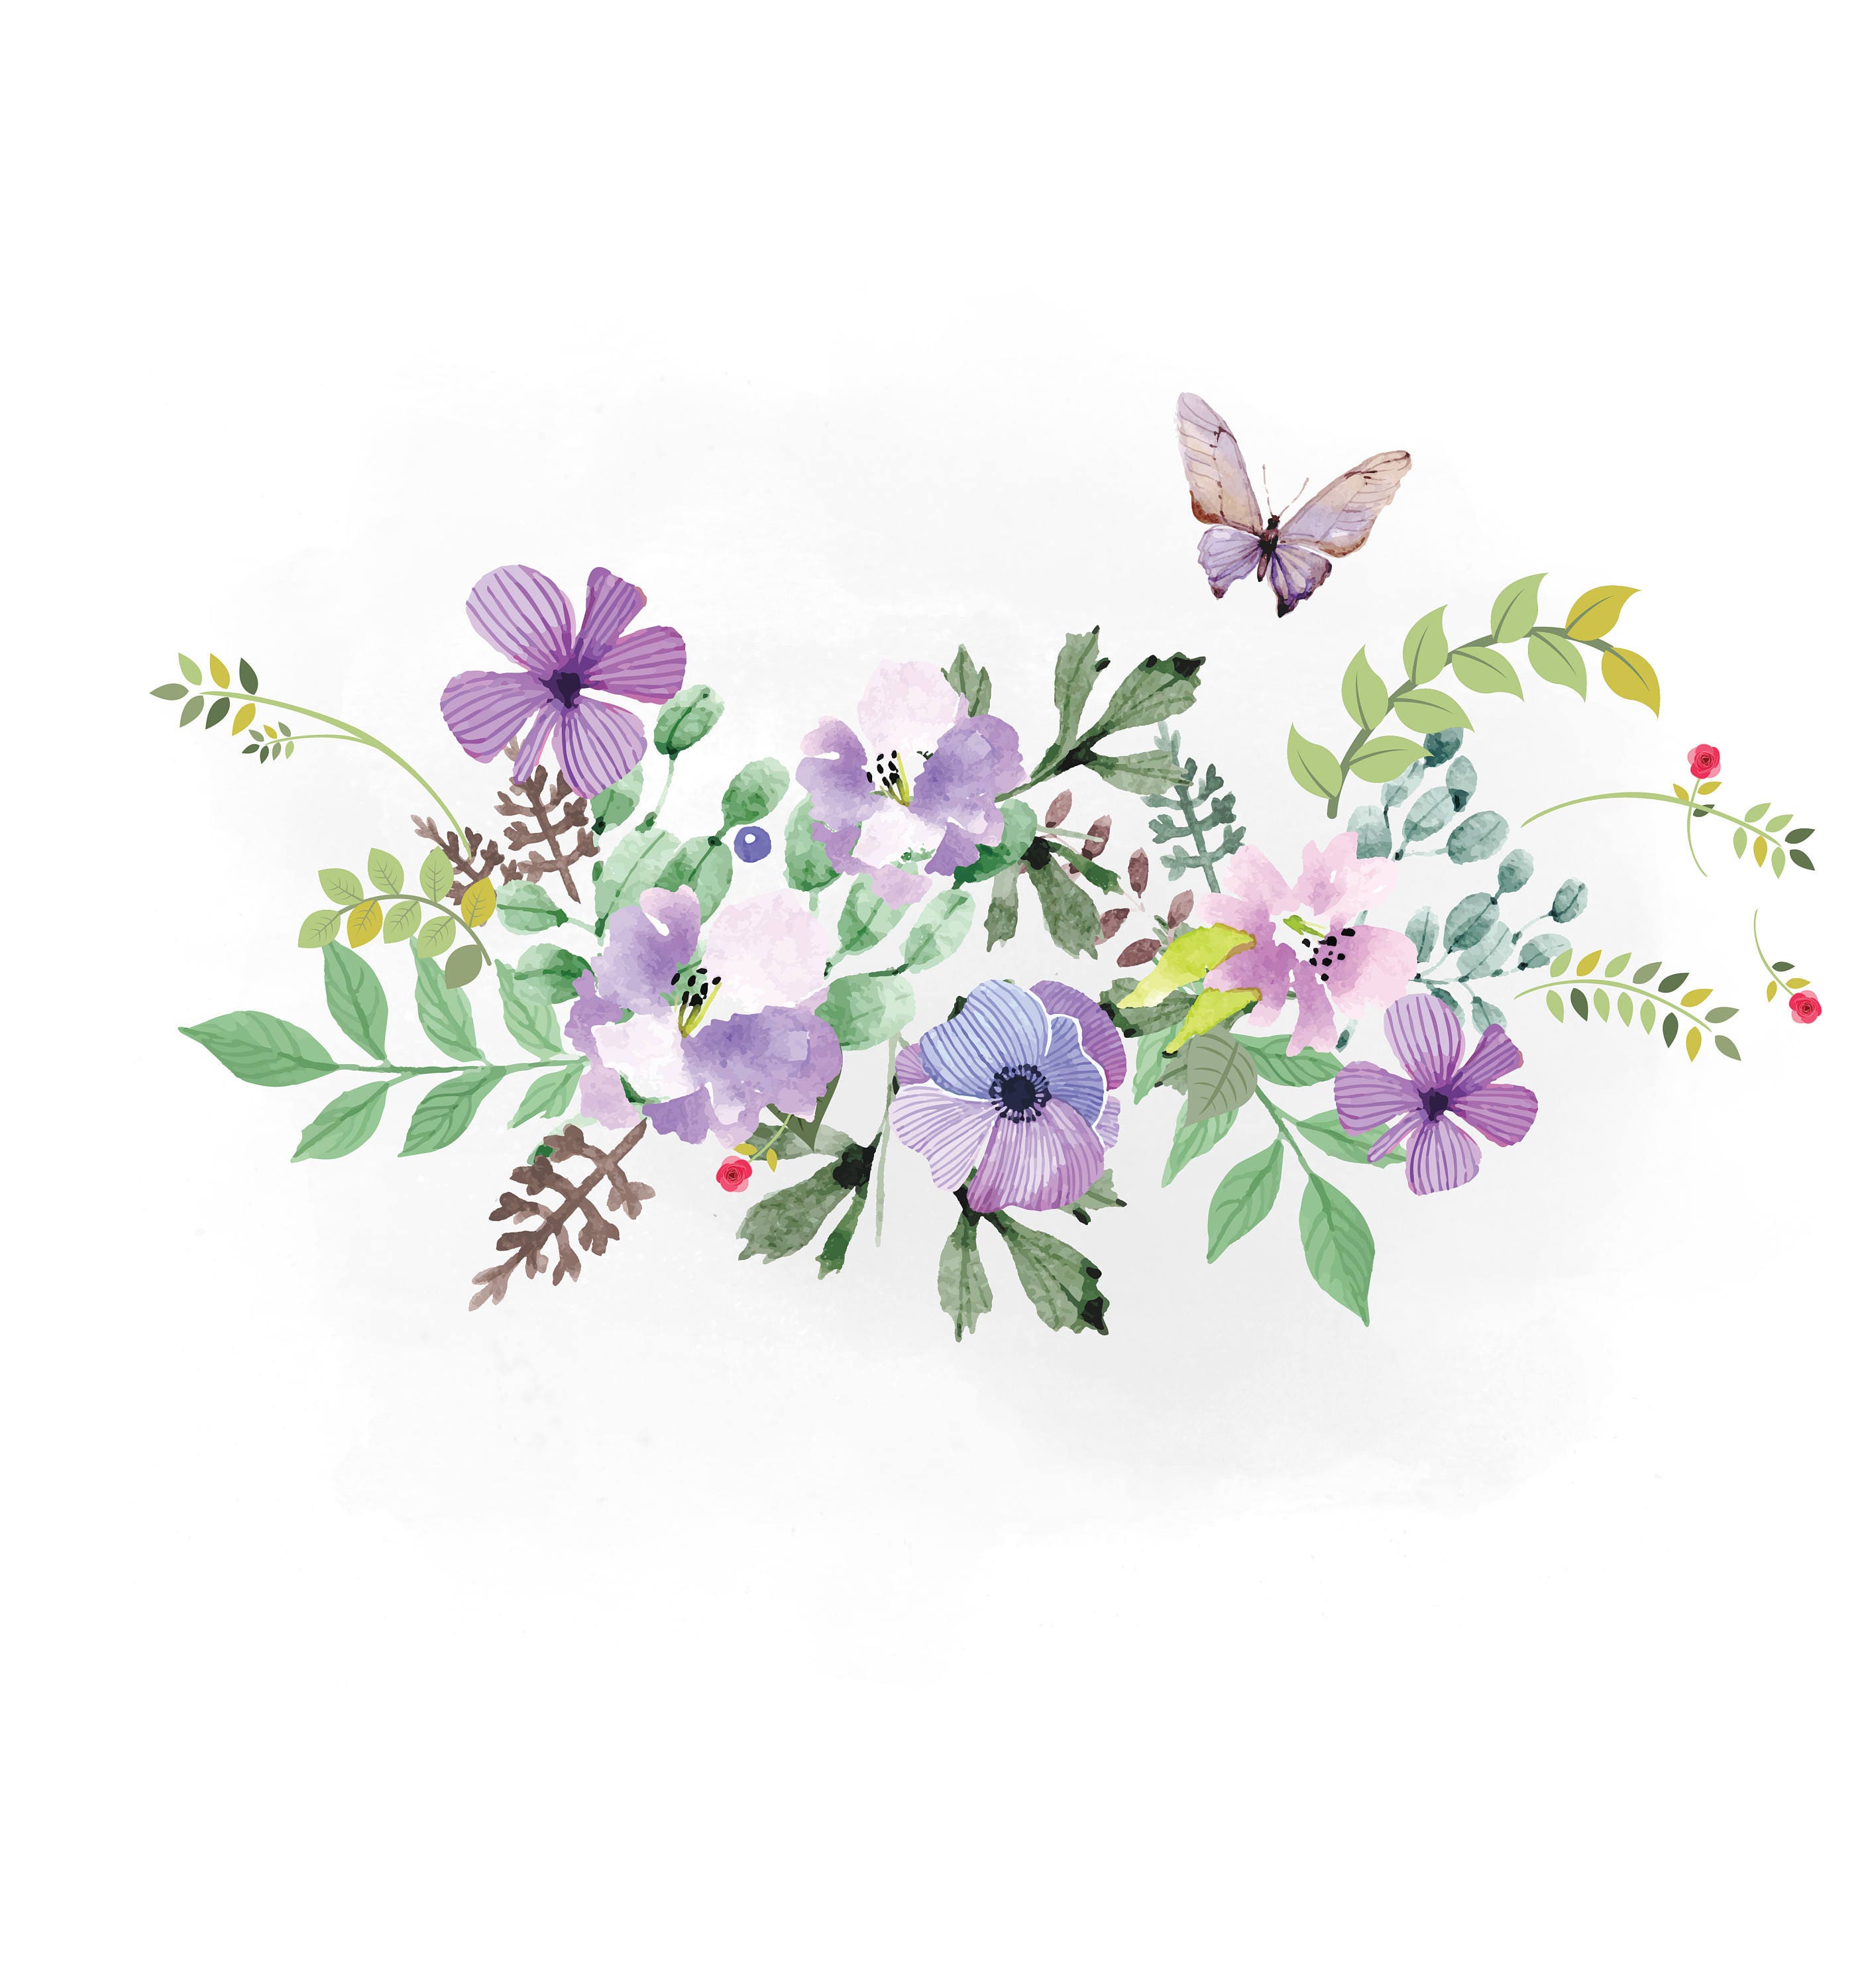 Spring Florals SVG clipart watercolor flowers svg wedding